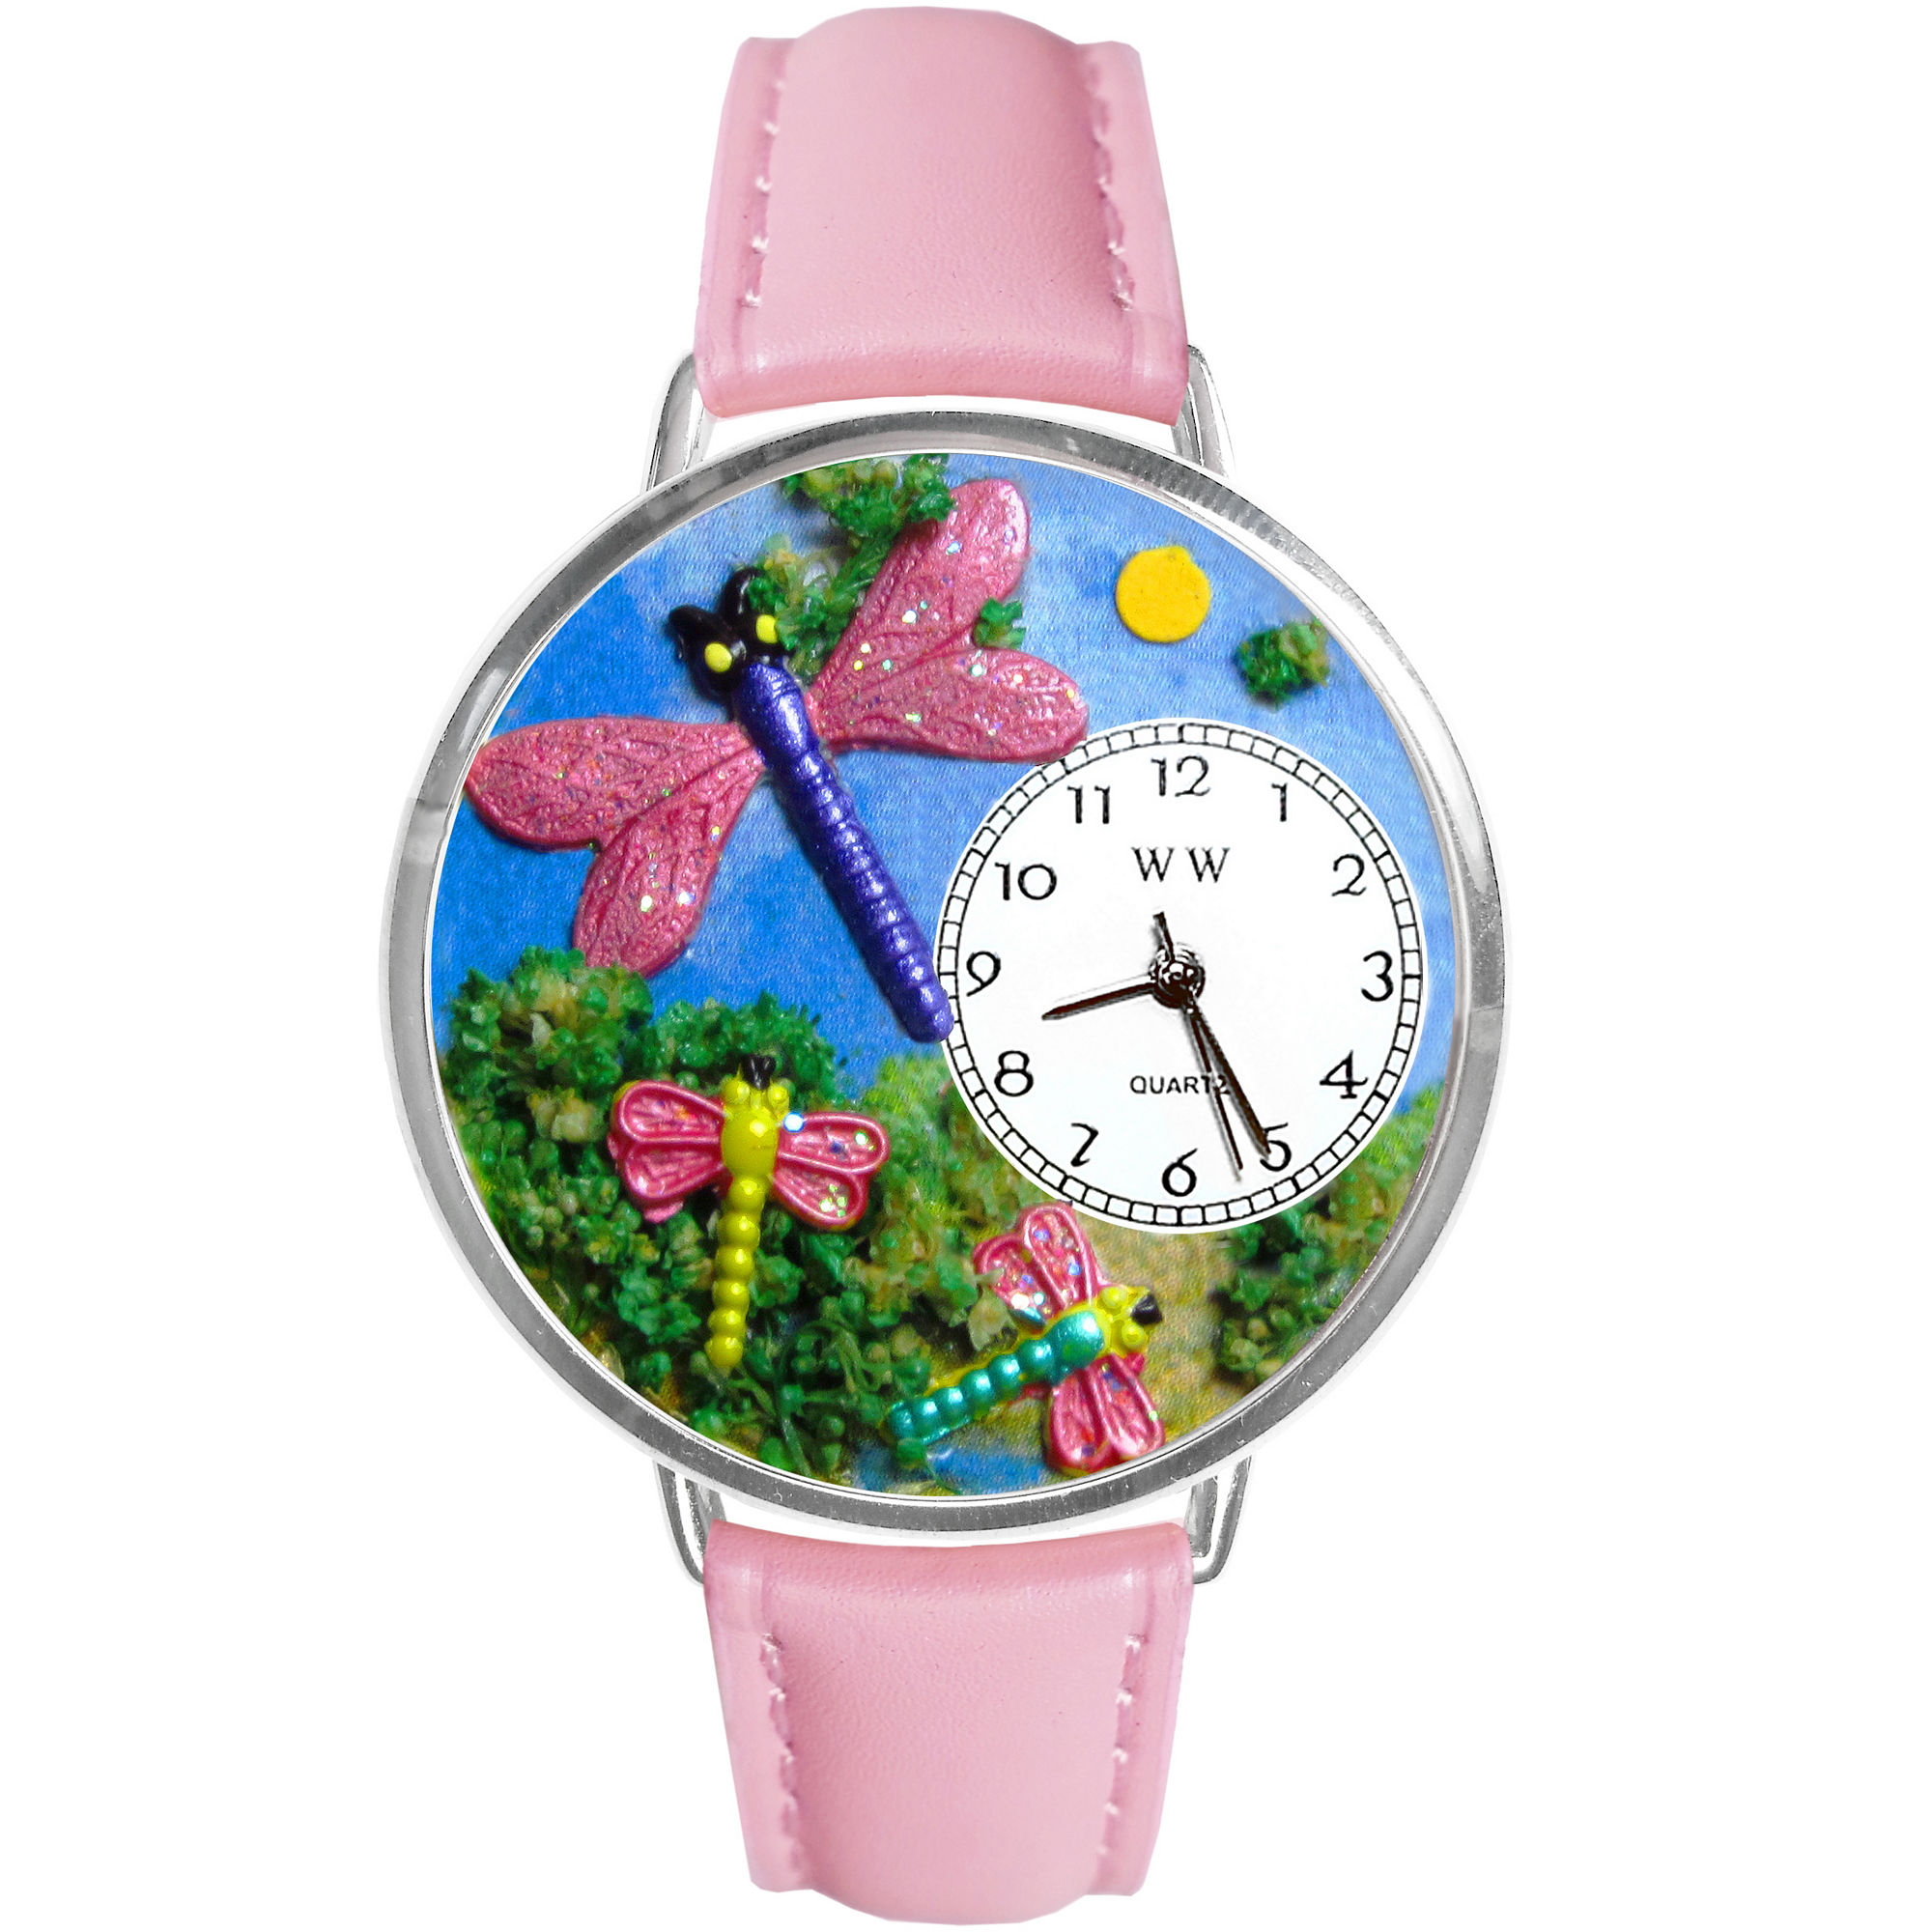 Whimsical Watches Personalized Dragonfly Womens Silver-Tone Bezel Pink Leather Strap Watch